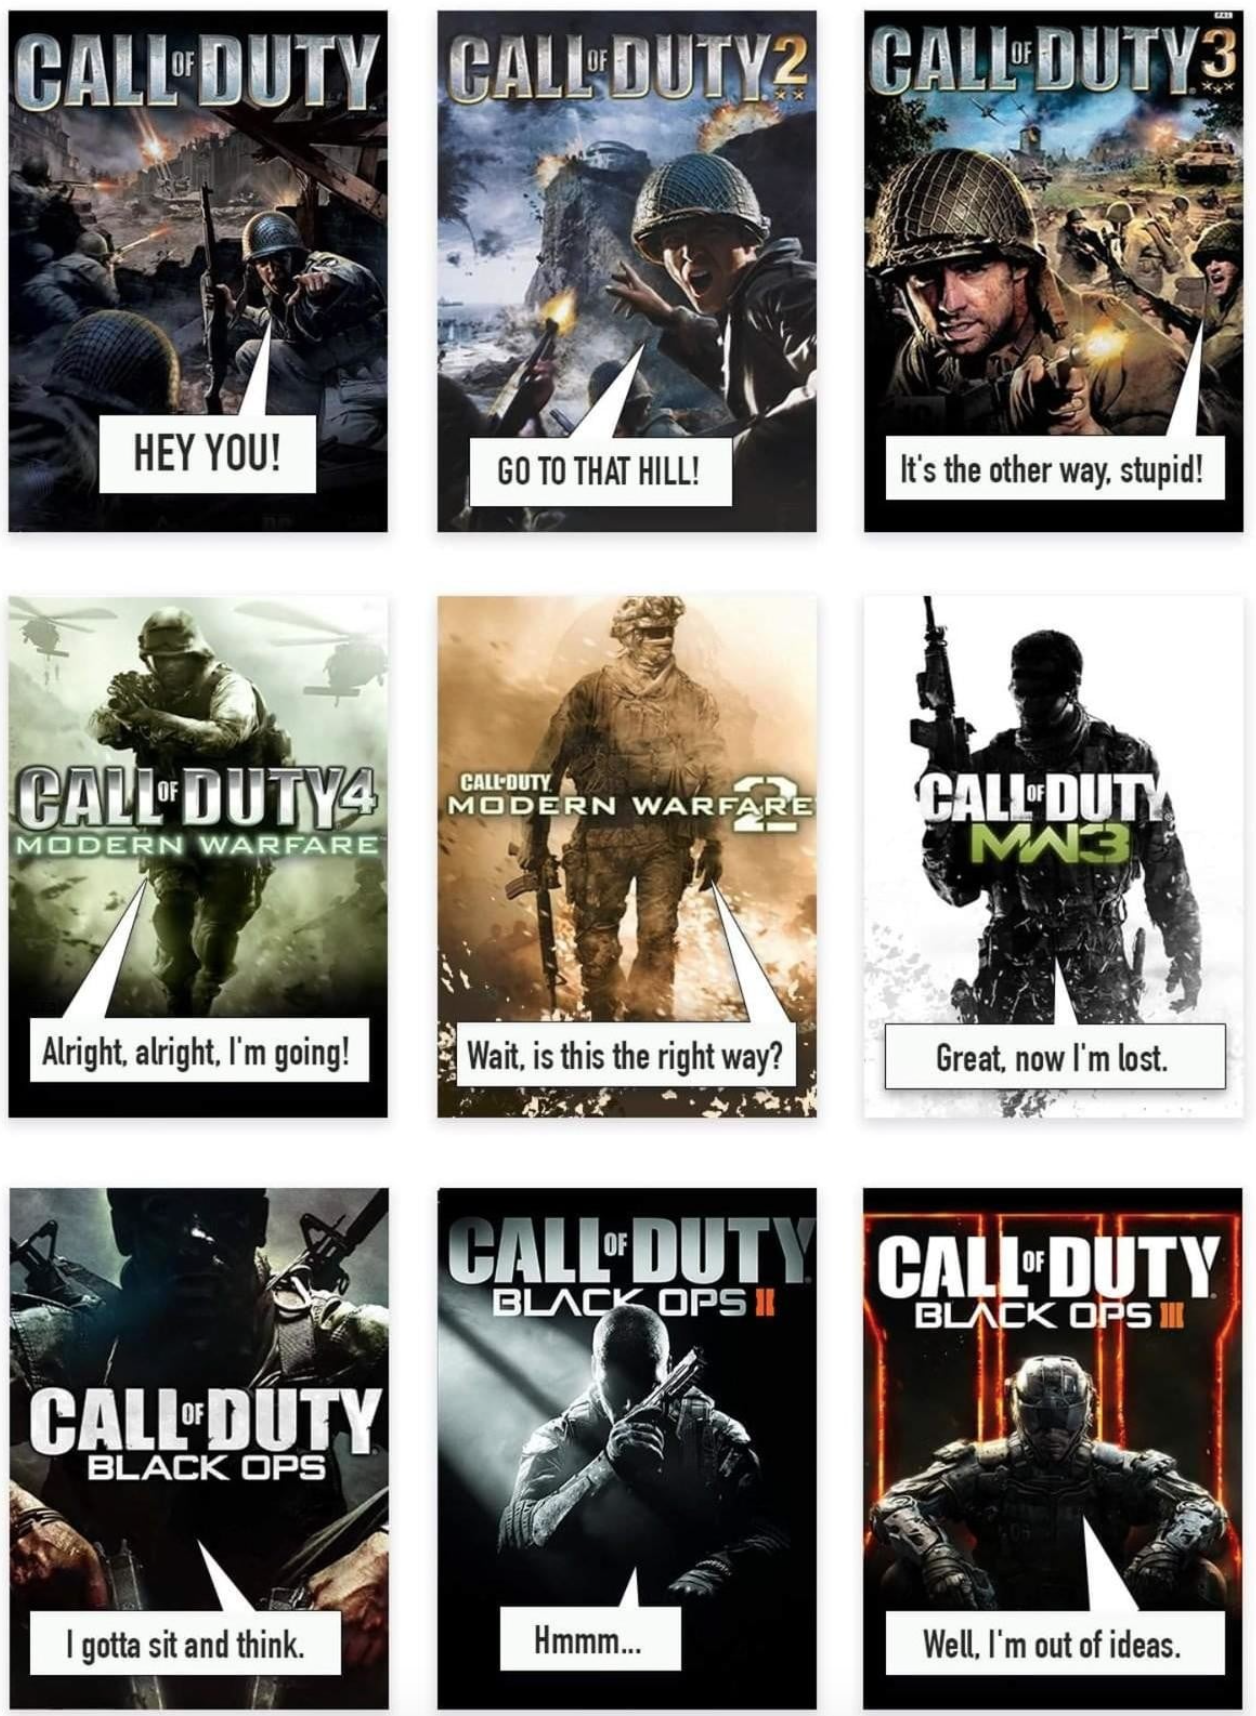 funny gaming memes - call of duty story meme - Call Duty Call OUTY2 Call DUTY3 Hey You! Go To That Hill! It's the other way, stupid! Callduty Motorn Wargare CallDuty M3 Modern Warfare Alright alright. Im going Wait, is this the right way? Great, now I'm l